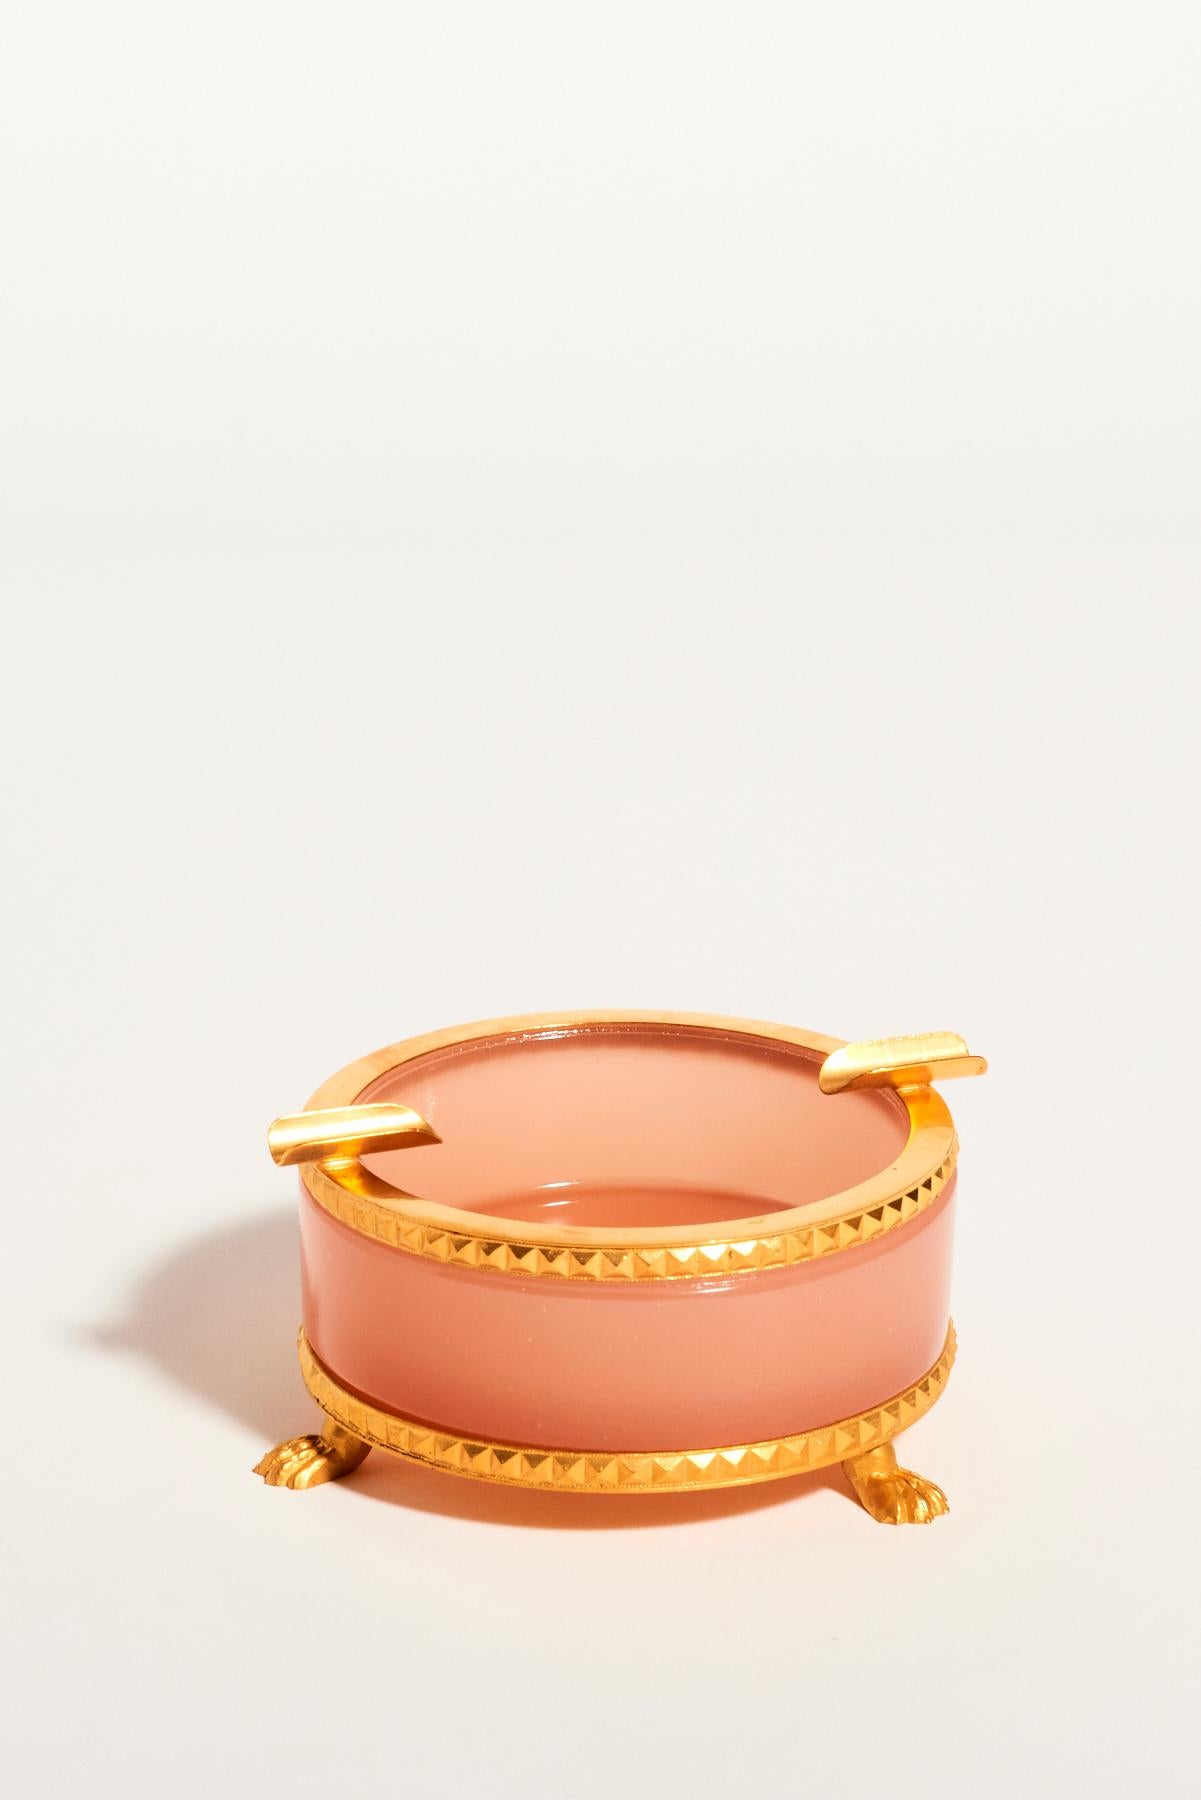 Lovely soft pink opaline glass ashtray from the 1940s.